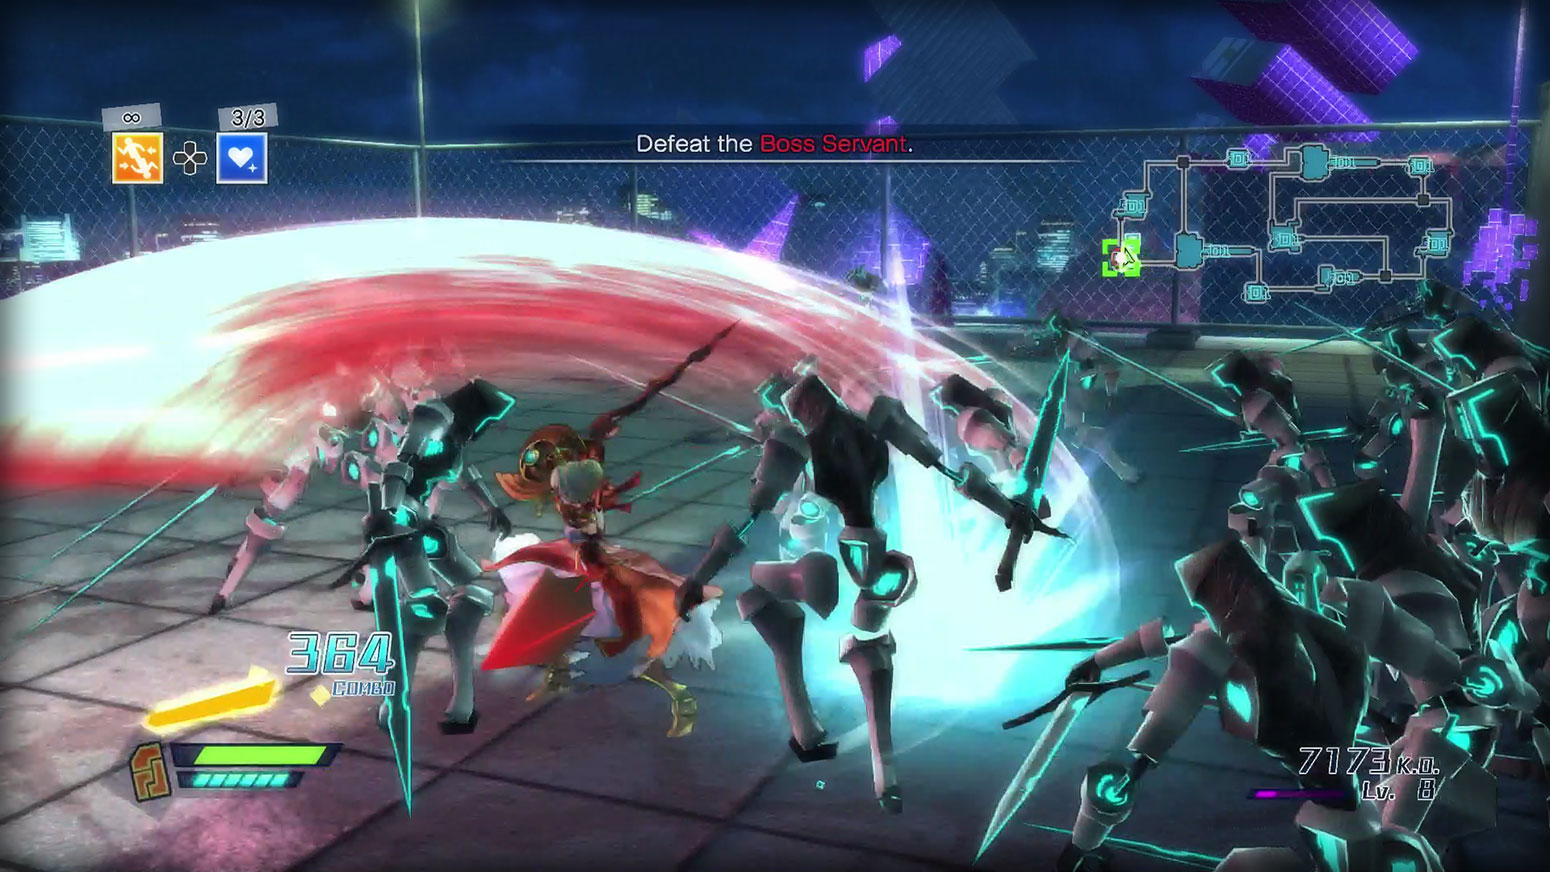 Fate/EXTELLA: The Umbral Star - High Speed Servant Action Screenshot 4